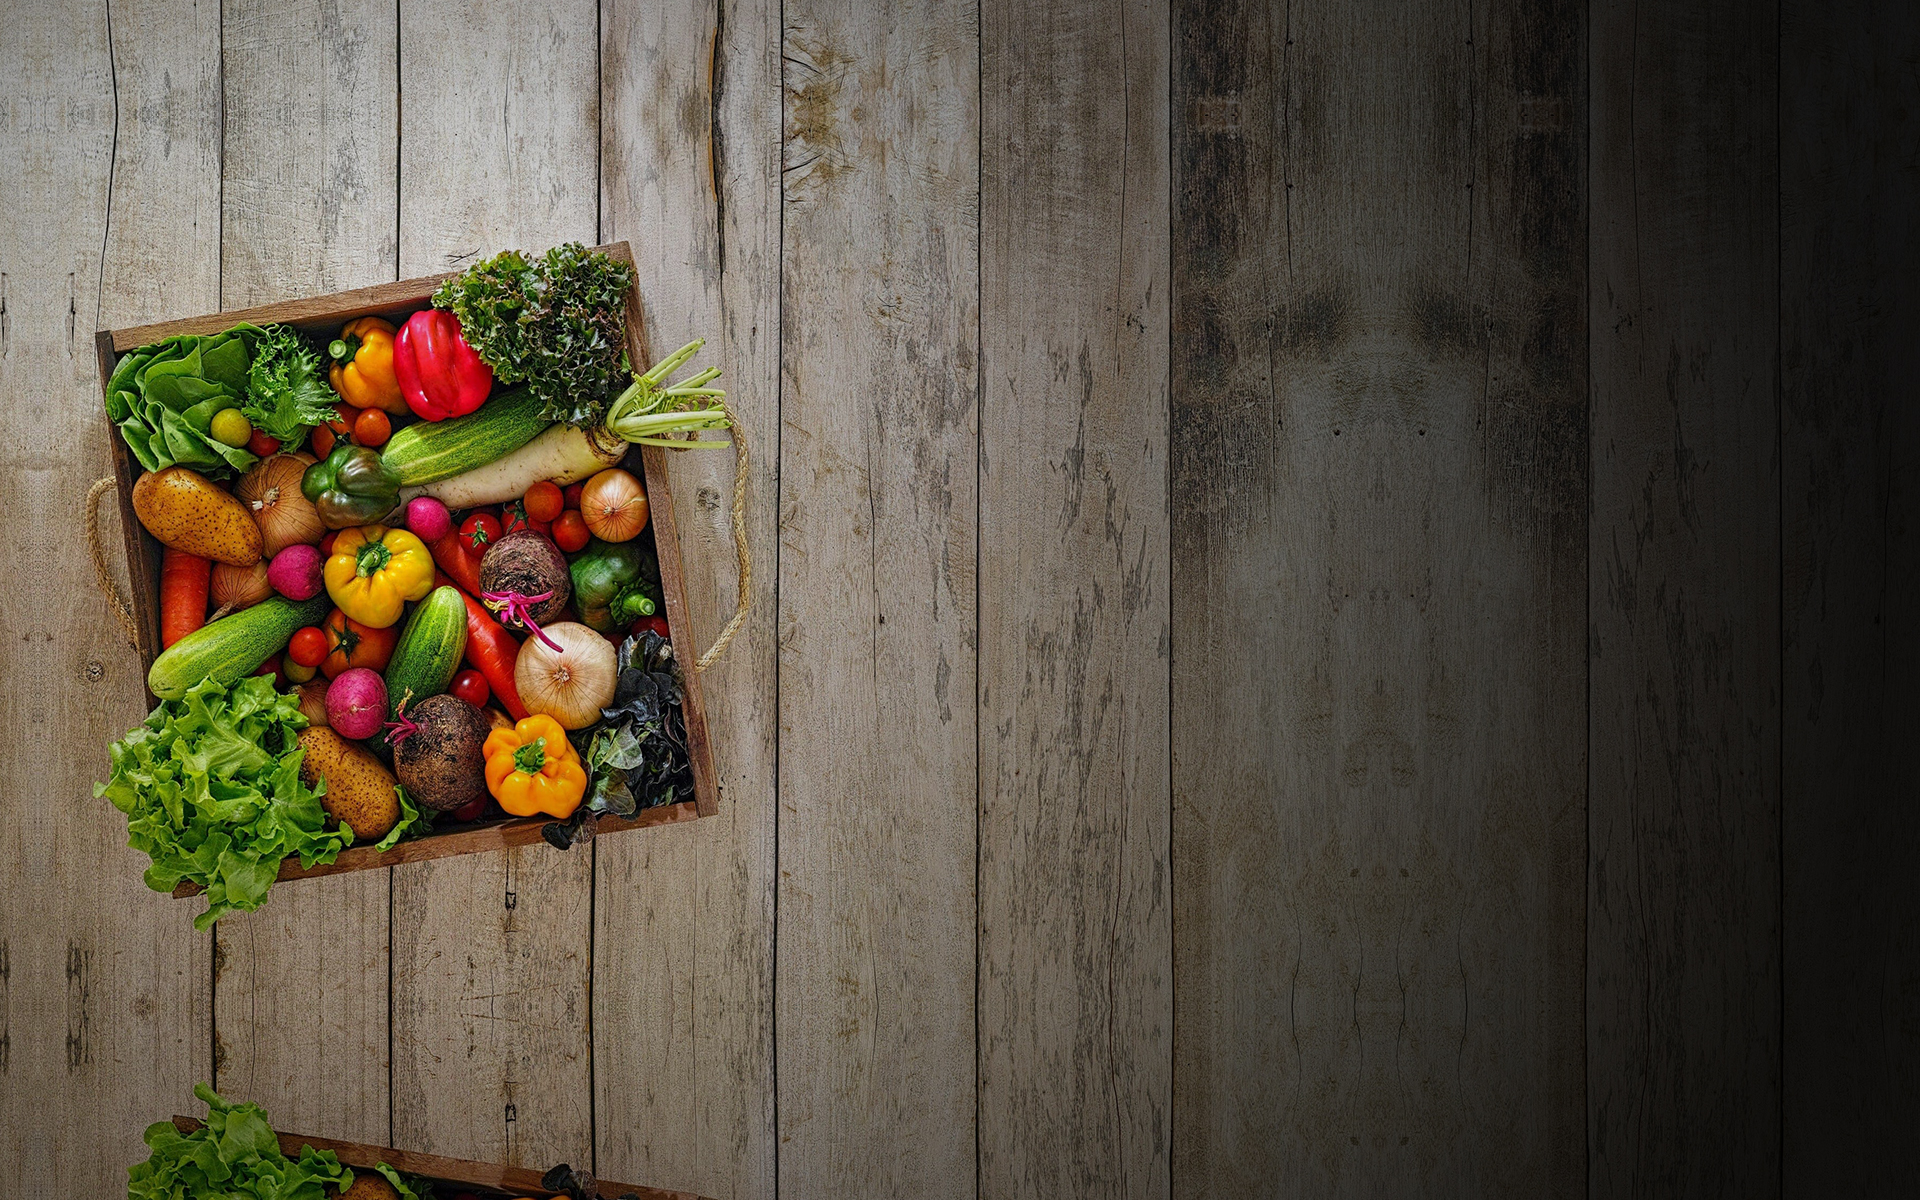 food and drink wallpaper,natural foods,local food,vegetable,still life photography,wood